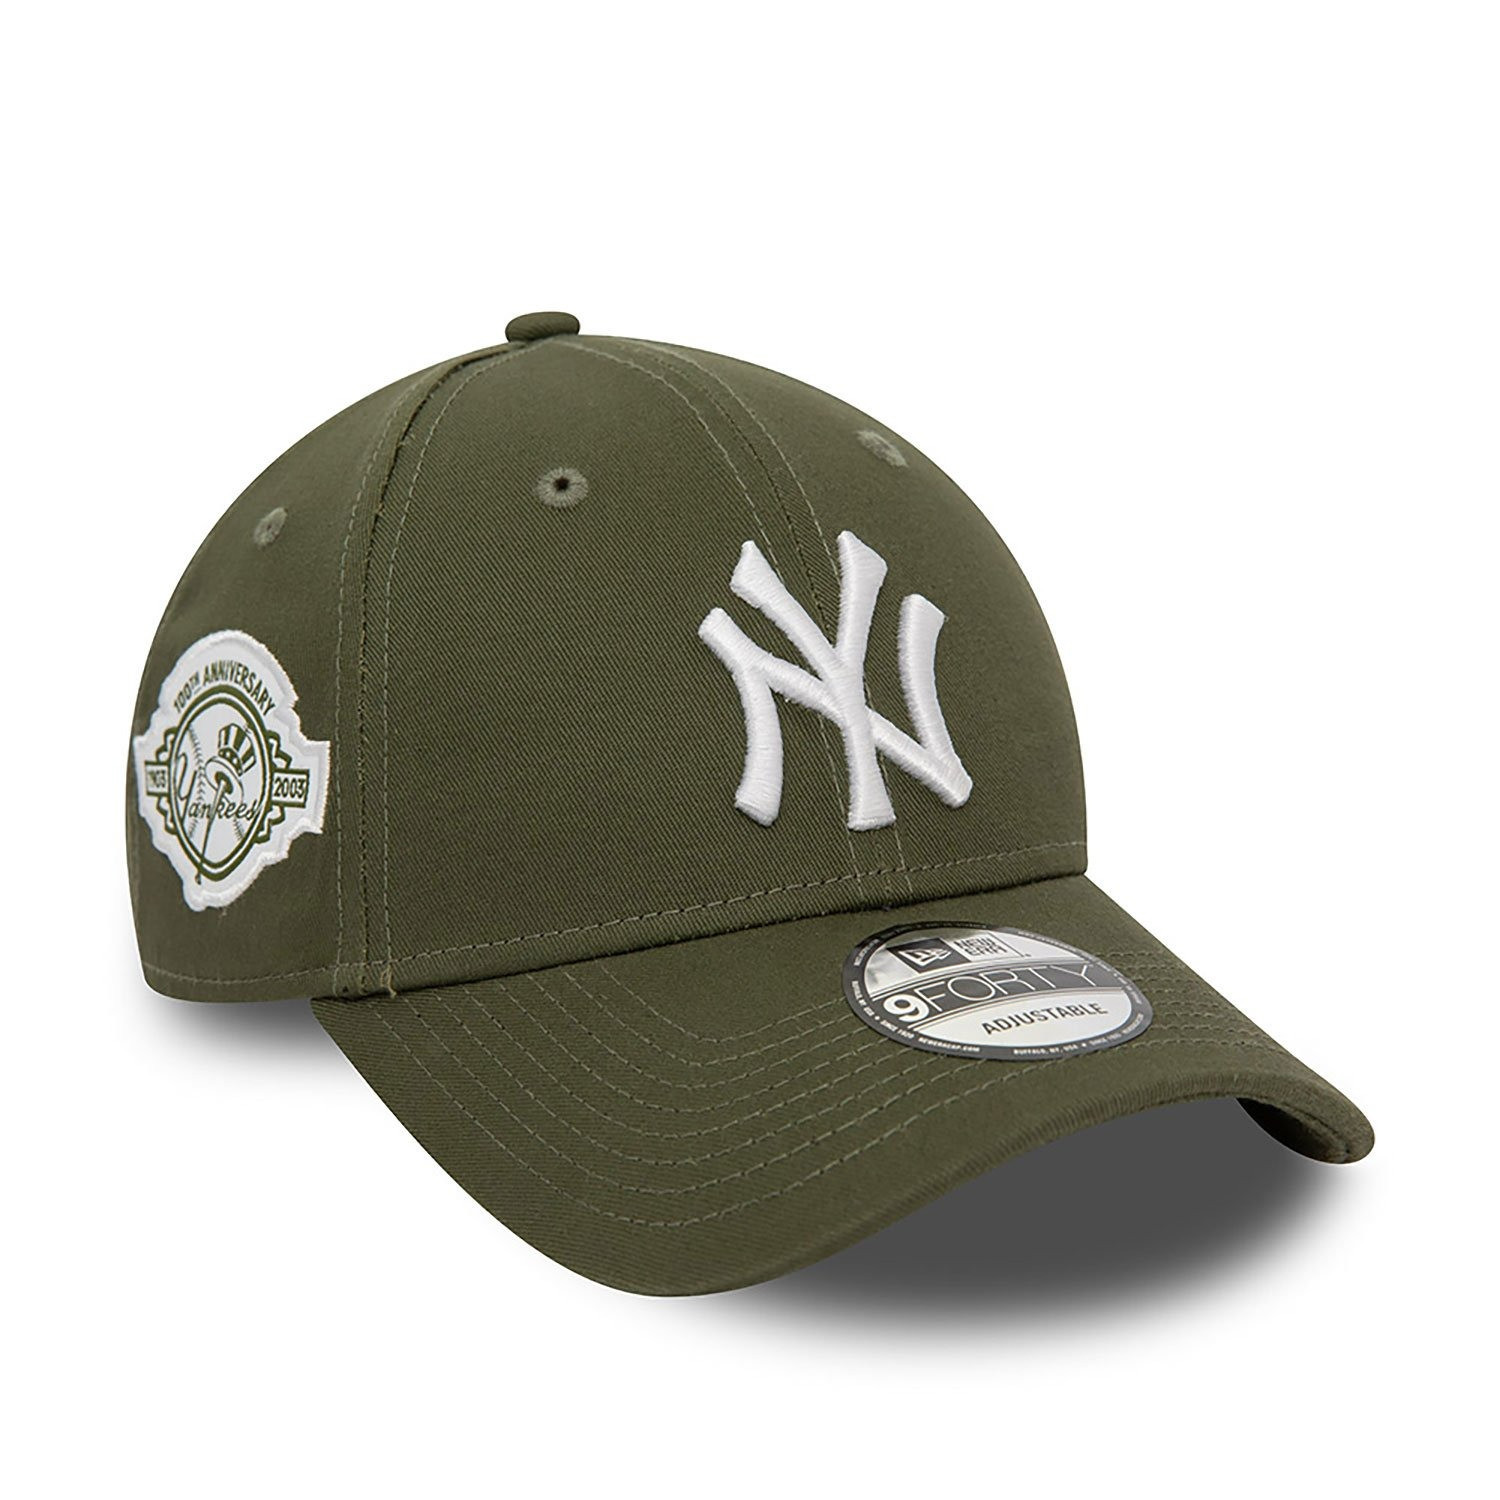 New Era 9Forty MLB New York Yankees Side Patch Unisex Adjustable Cap - Green - 60435138